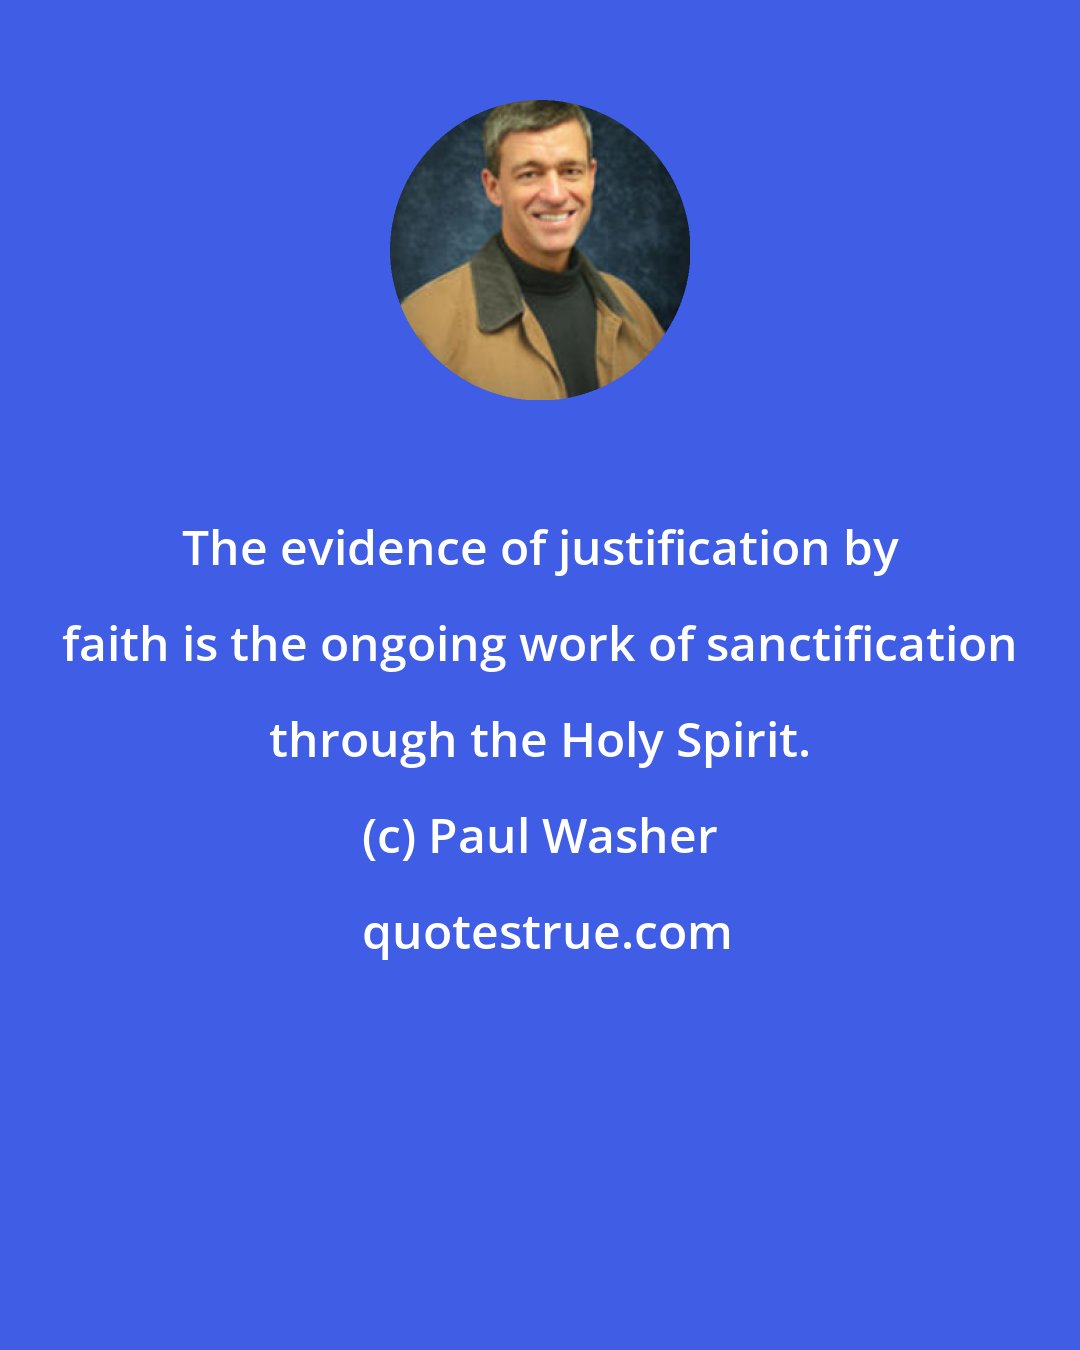 Paul Washer: The evidence of justification by faith is the ongoing work of sanctification through the Holy Spirit.